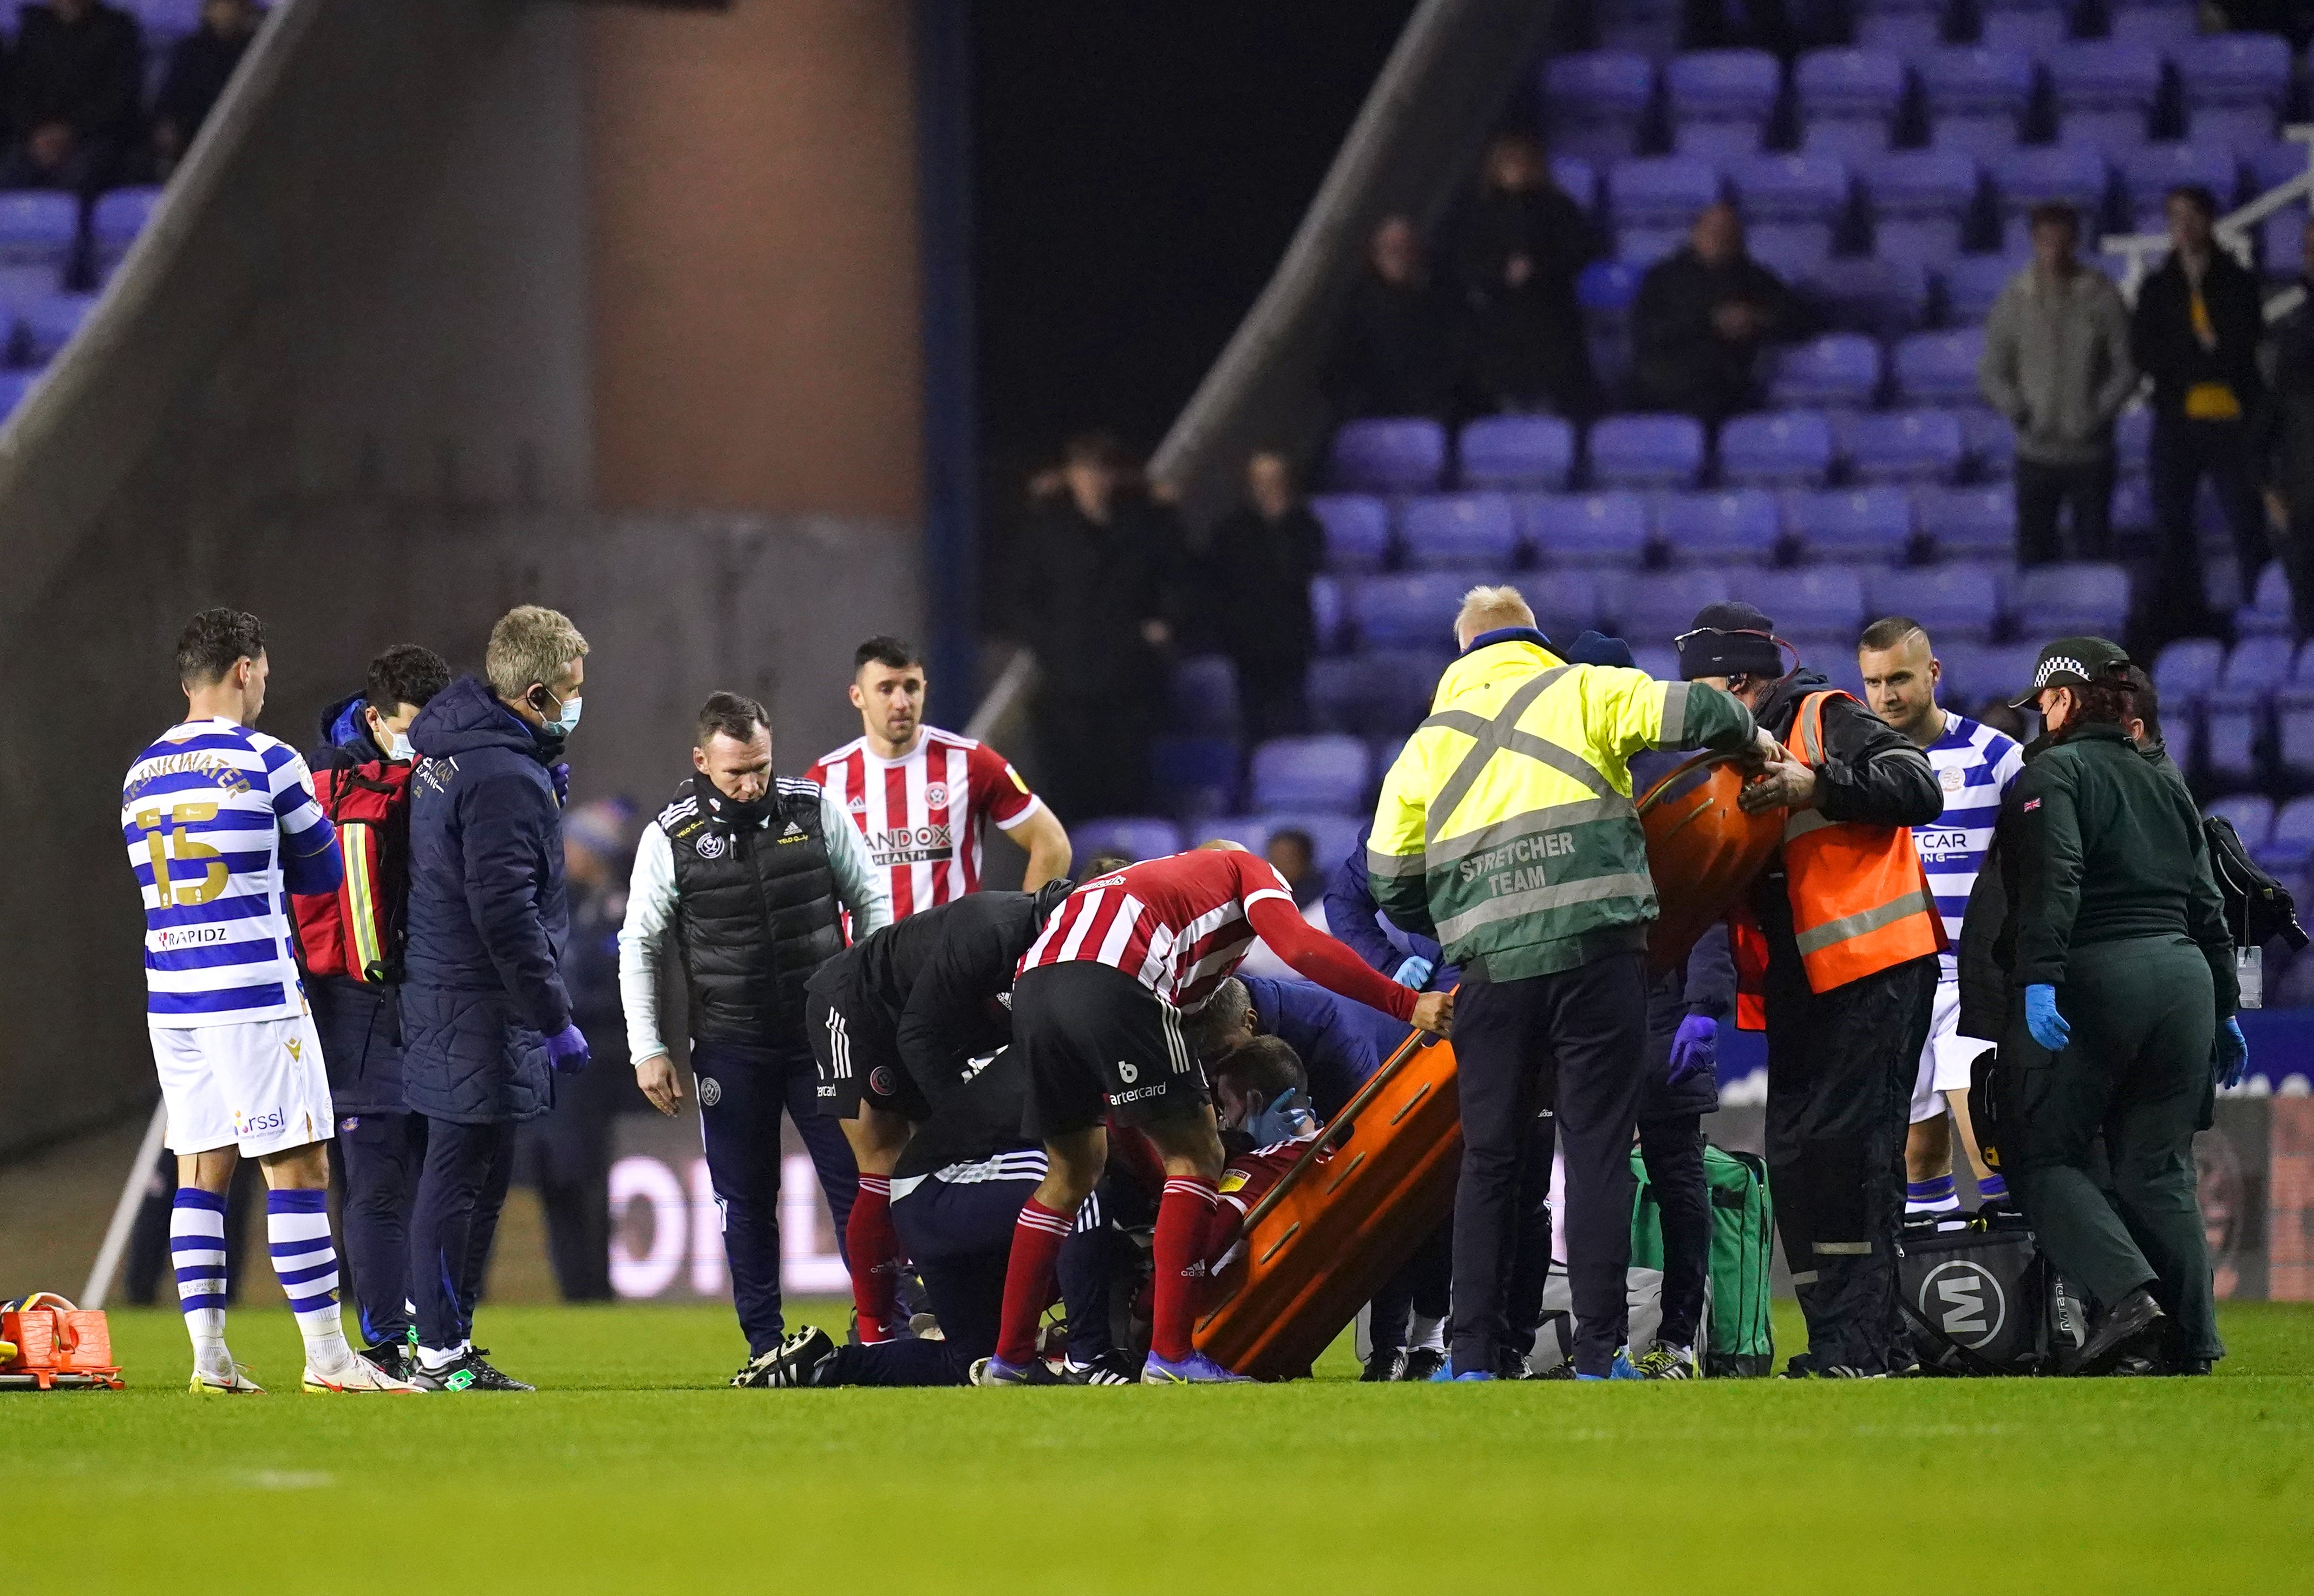 Sheffield United’s John Fleck was taken from the pitch on a stretcher